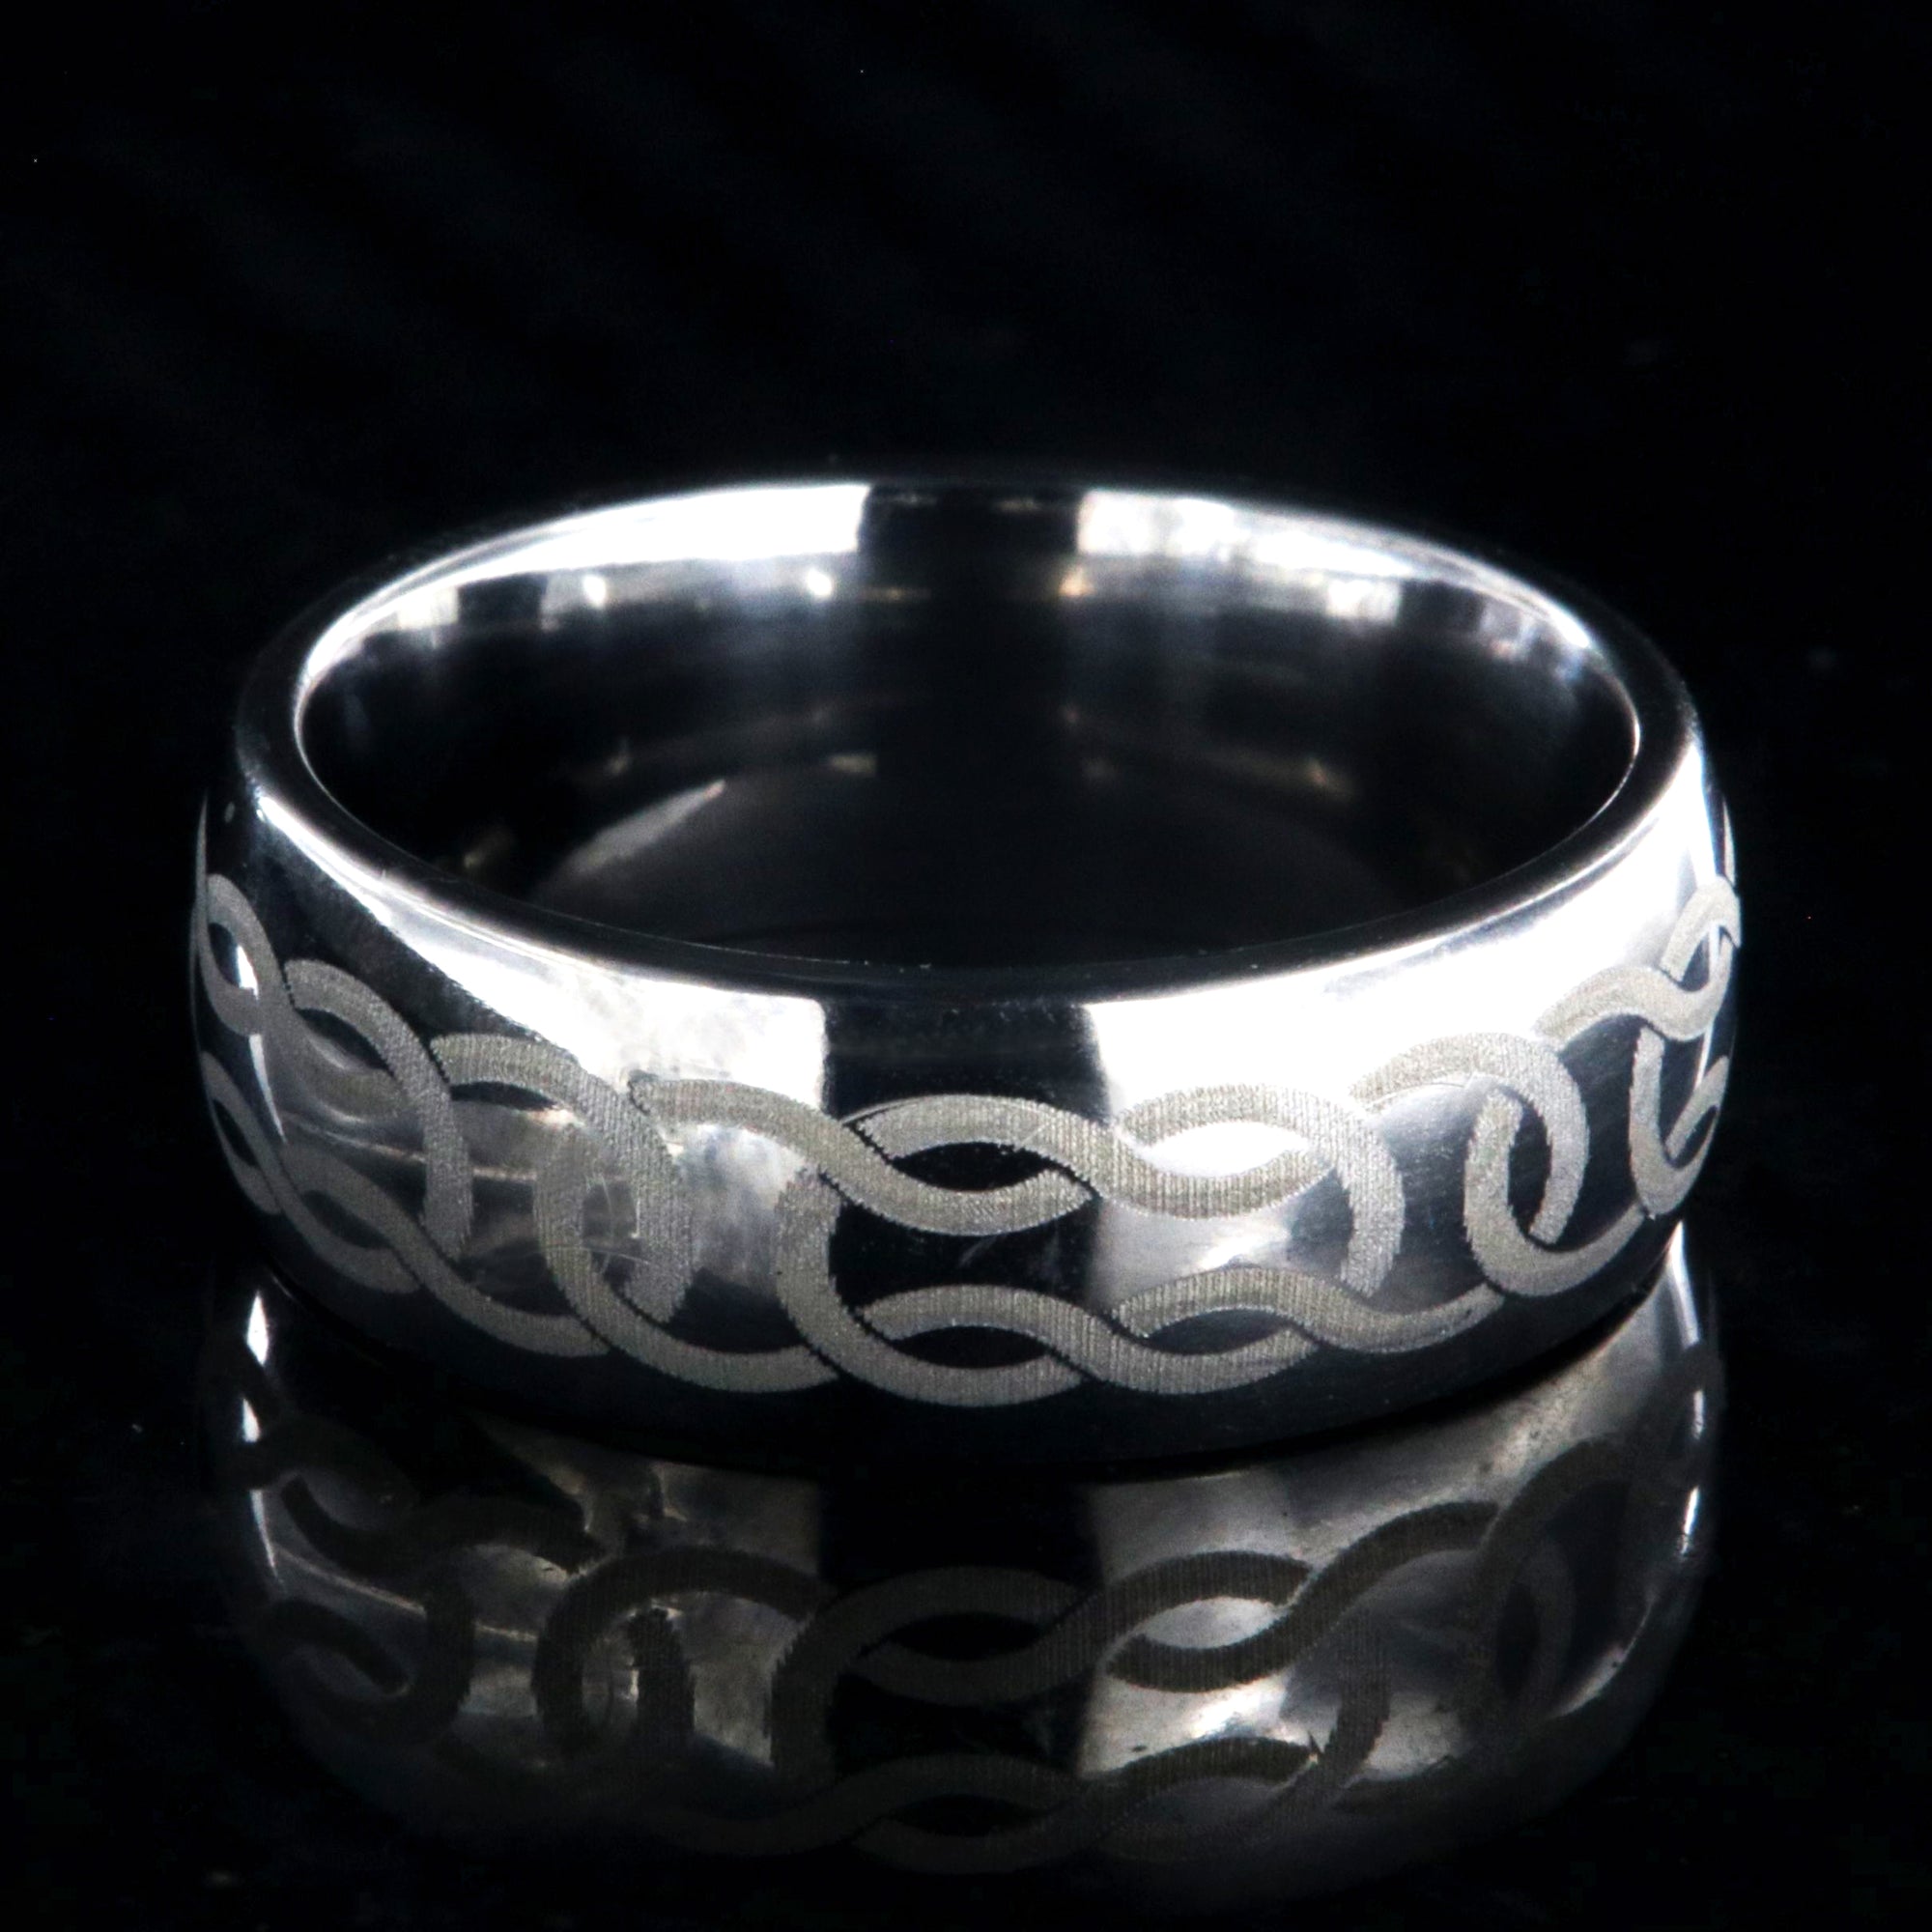 8mm wide titanium ring with Celtic knot design and rounded profile